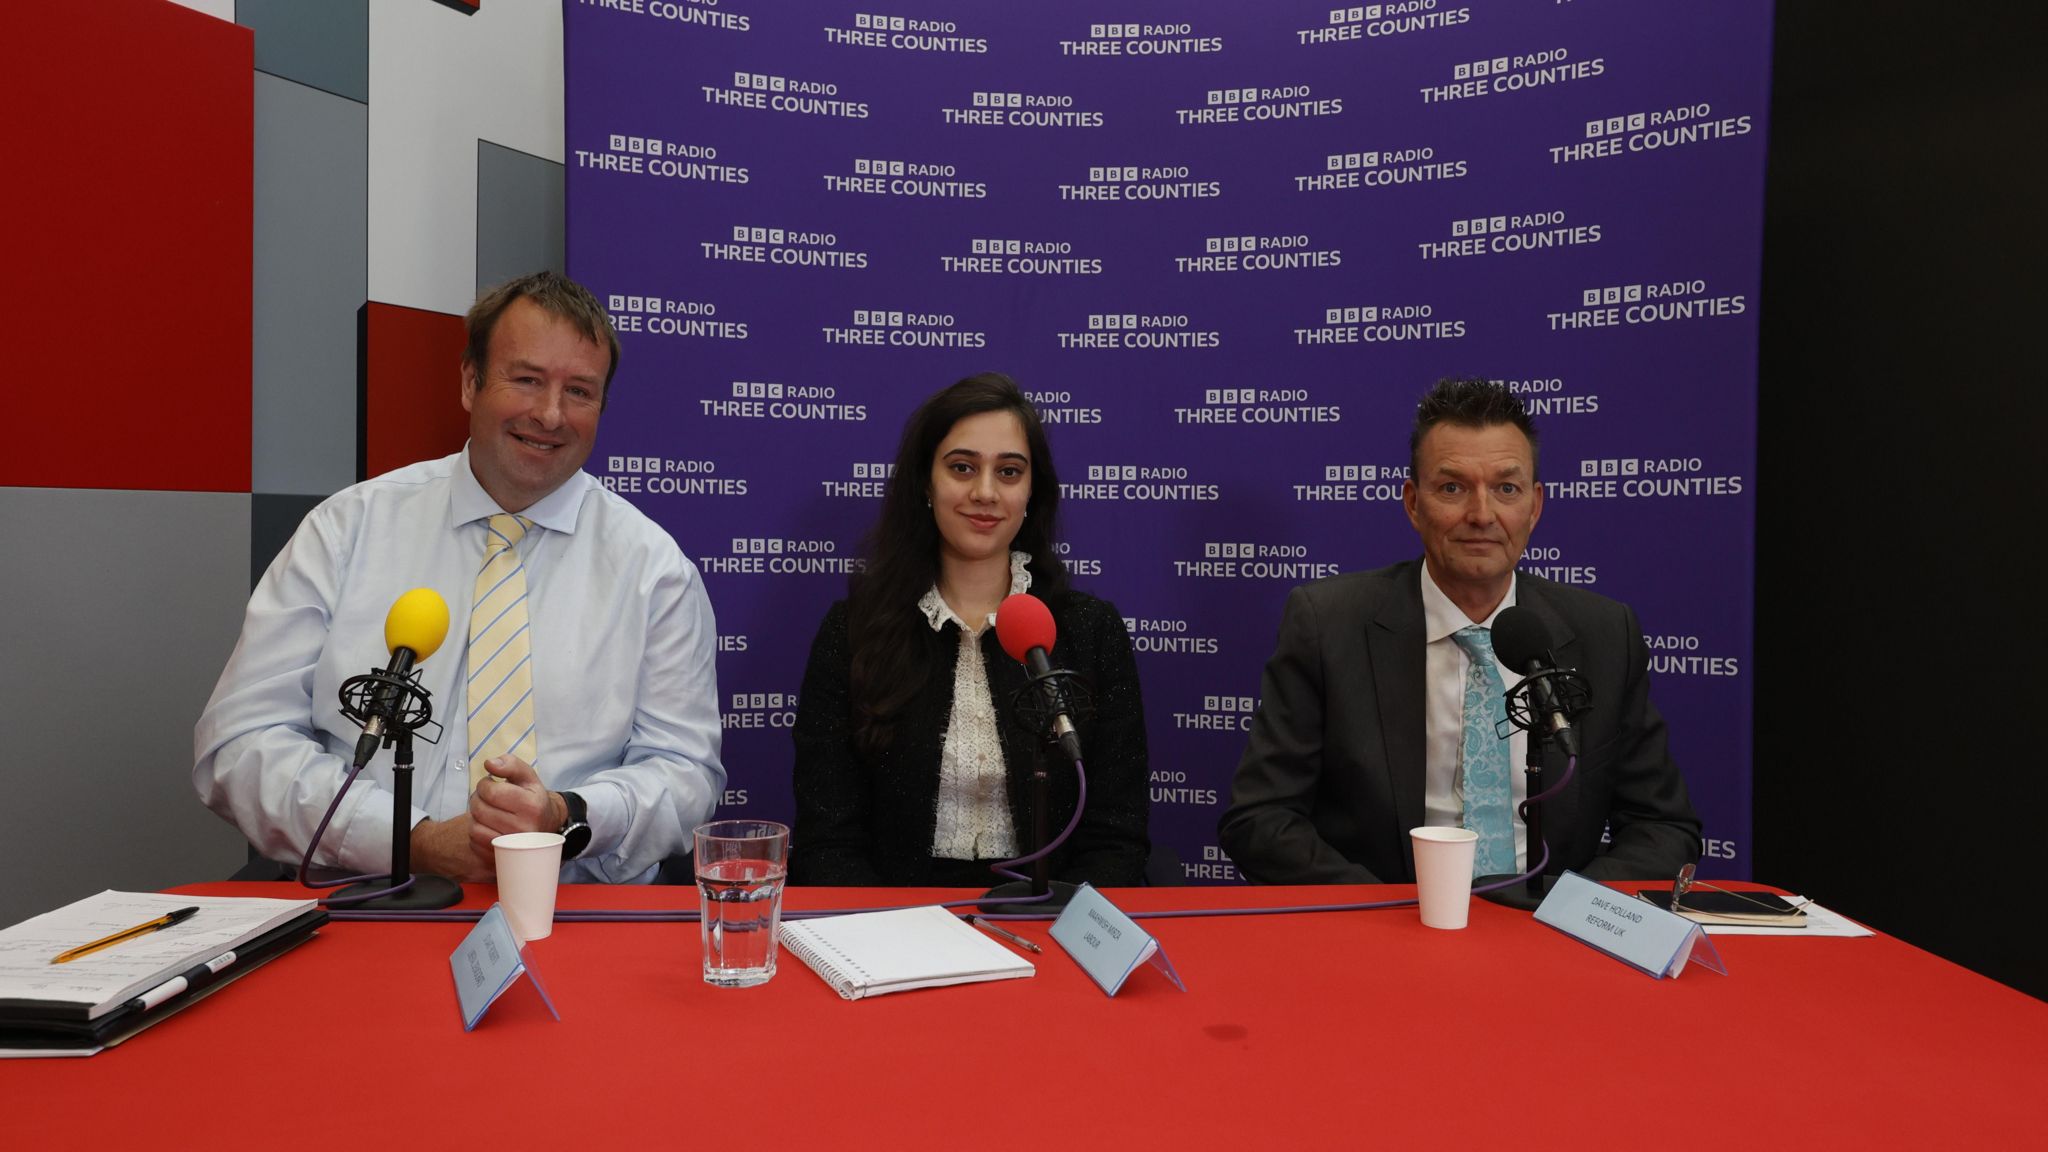 Three candidates in the Mid Bedfordshire debate smiling at the camera